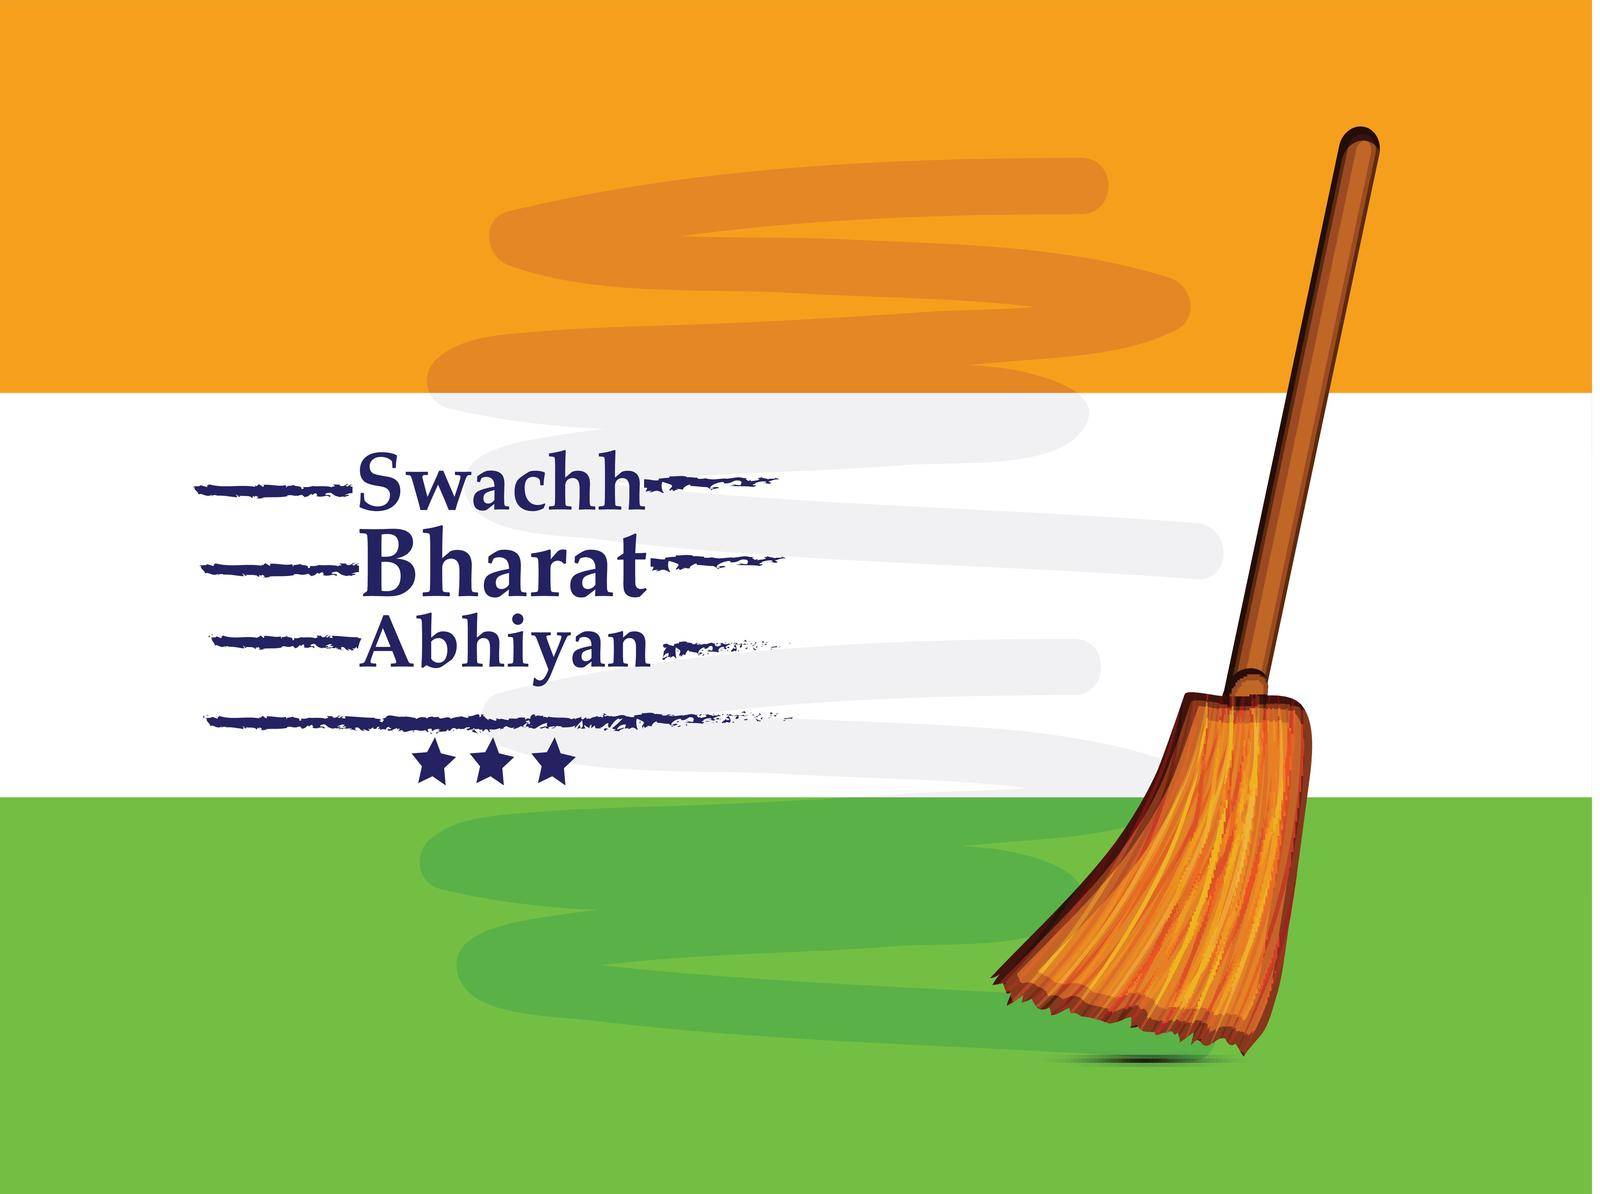 Swachh Bharat Abhiyan, or Clean India Mission is a country-wide campaign initiated by the Government of India in 2014 to eliminate open defecation and improve solid waste management